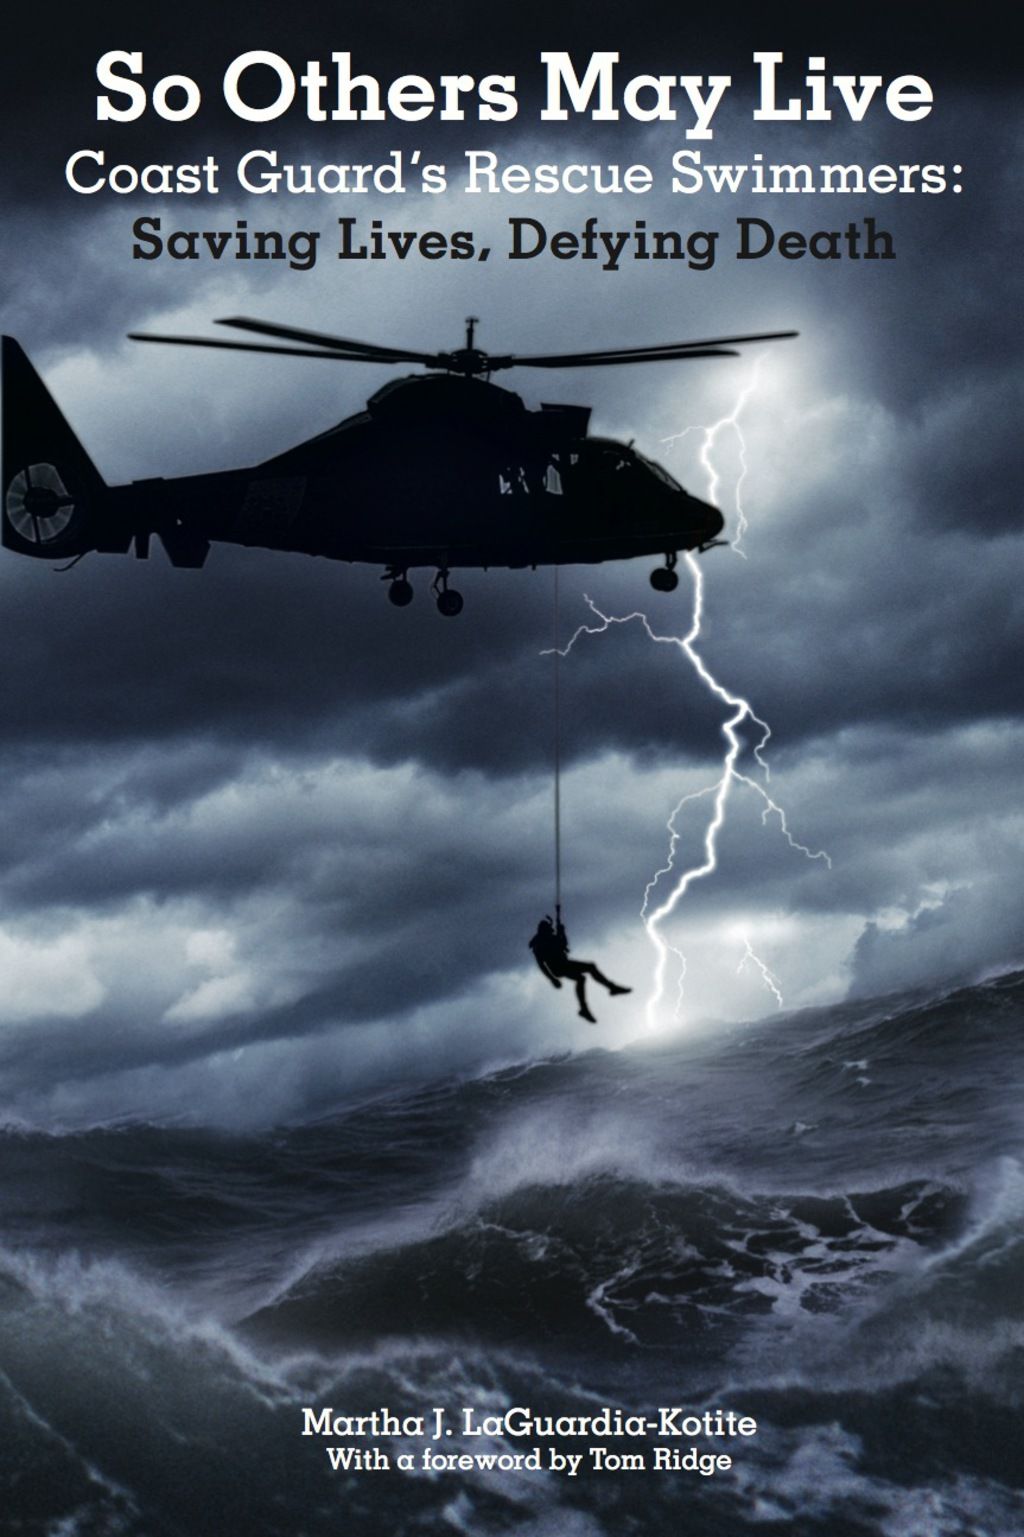 So Others May Live (eBook). Coast guard rescue, Coast guard rescue swimmer, Coast guard